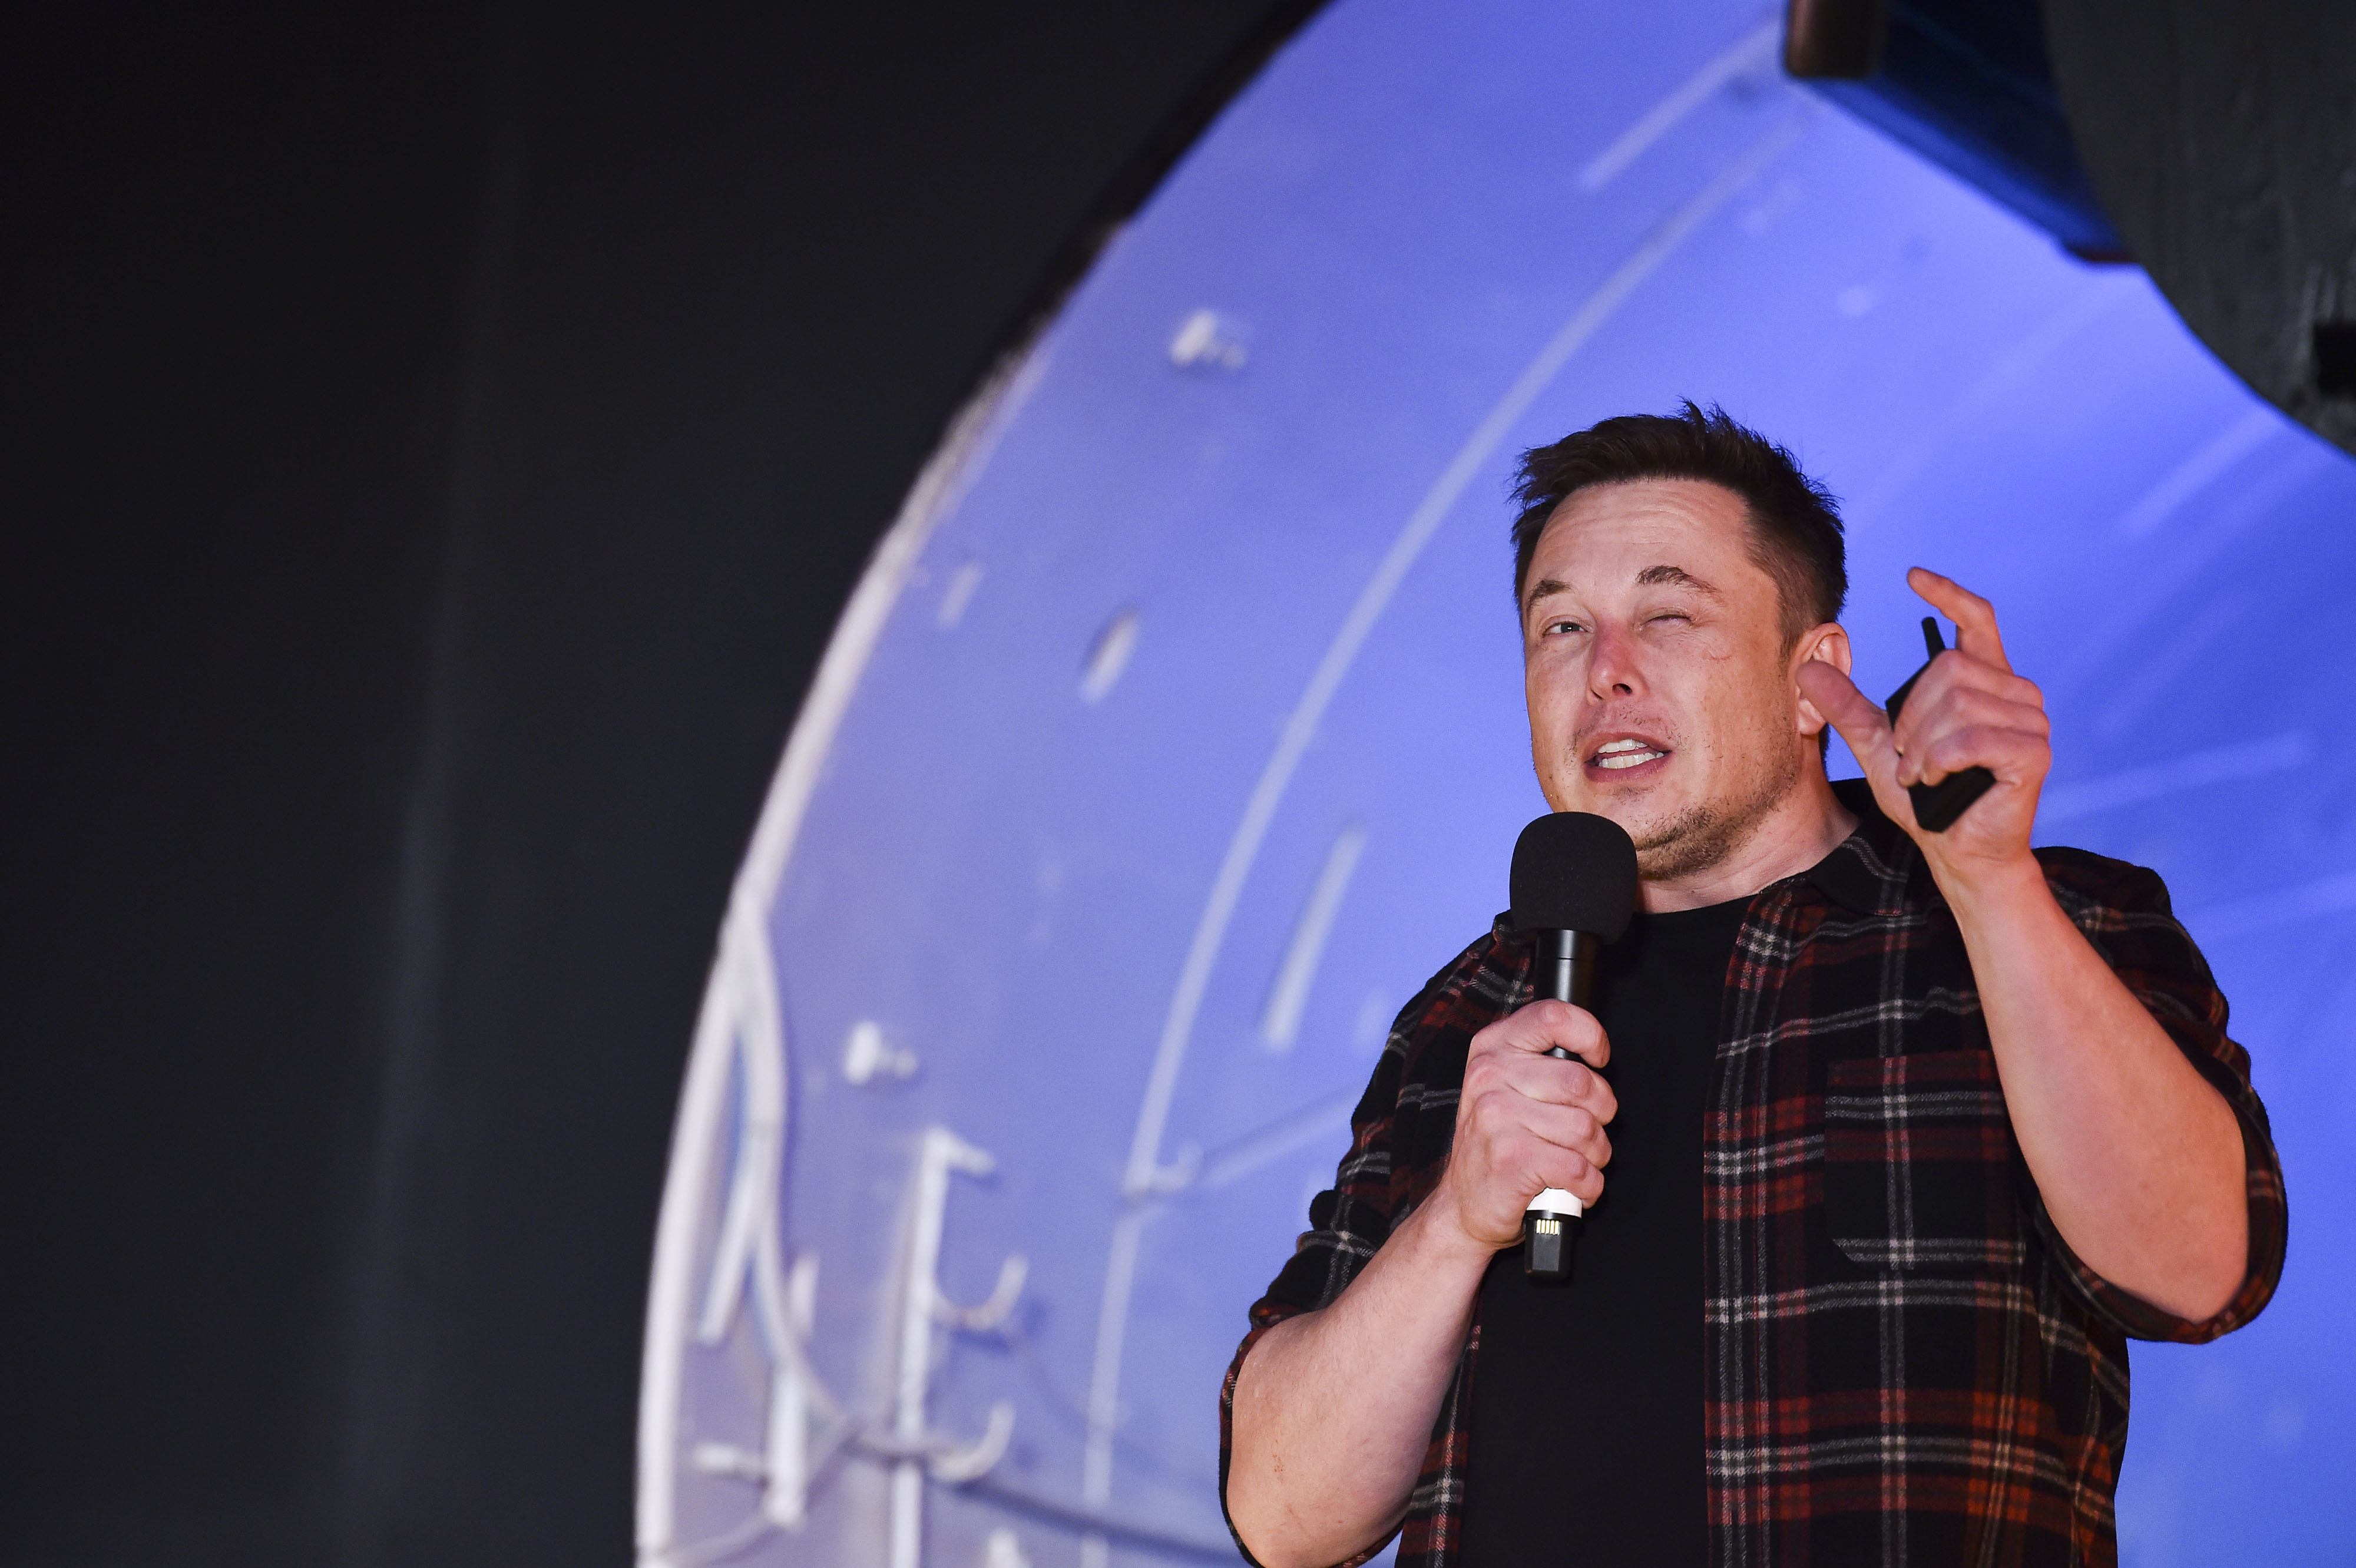 Elon Musk, co-founder and Chief Executive Officer of Tesla Inc., speaks at an unveiling event for The Boring Company Hawthorne test tunnel December 18, 2018 in Hawthorne, California.